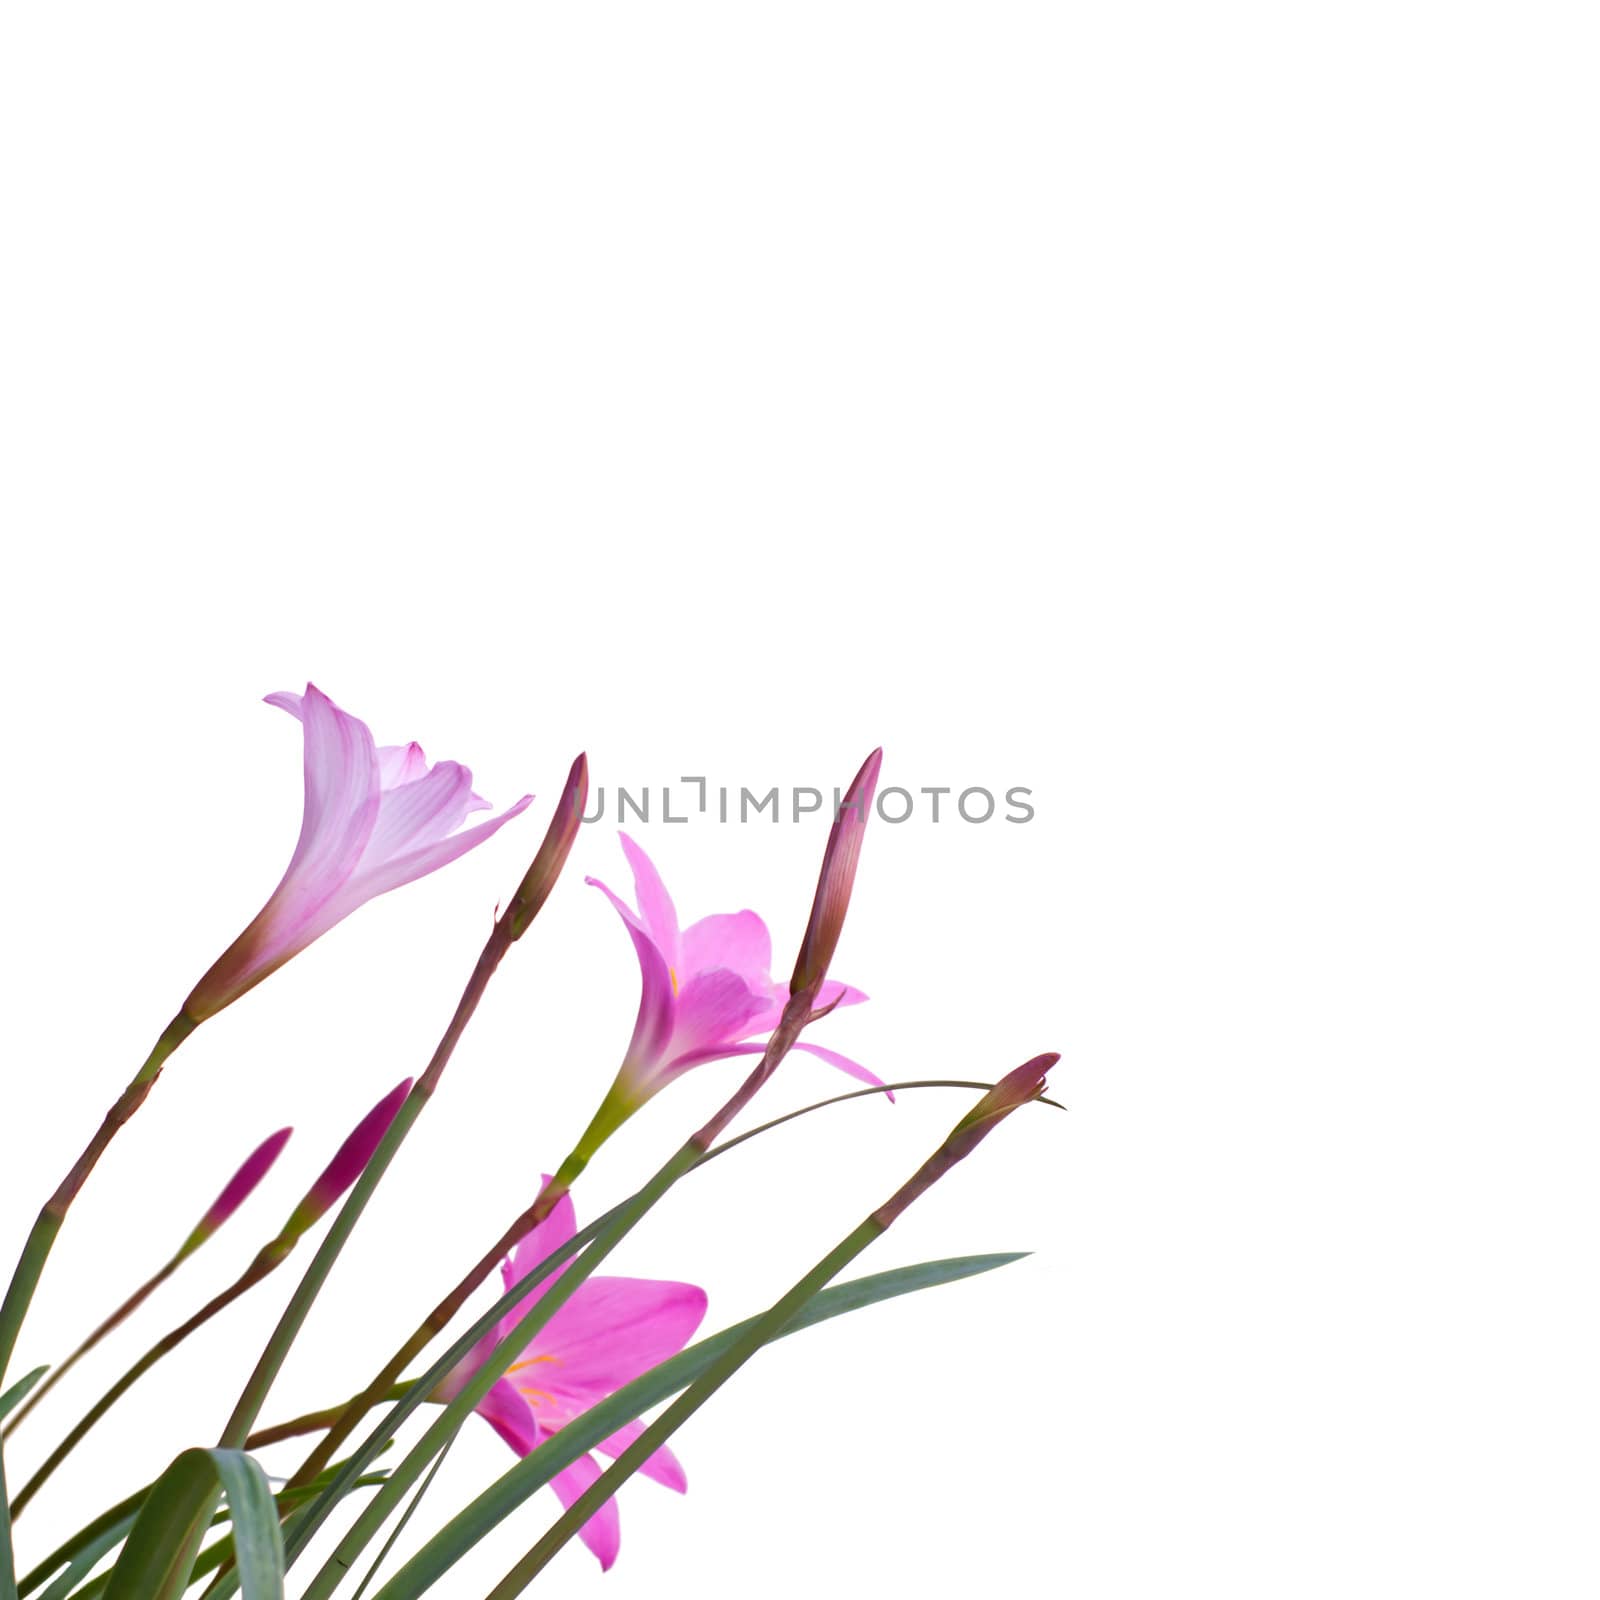 Rain Lily(Fairy Lily) blooming in rainy season, Habranthus brachyandrus with Fadjar's pink(Zephyranthes rosea)